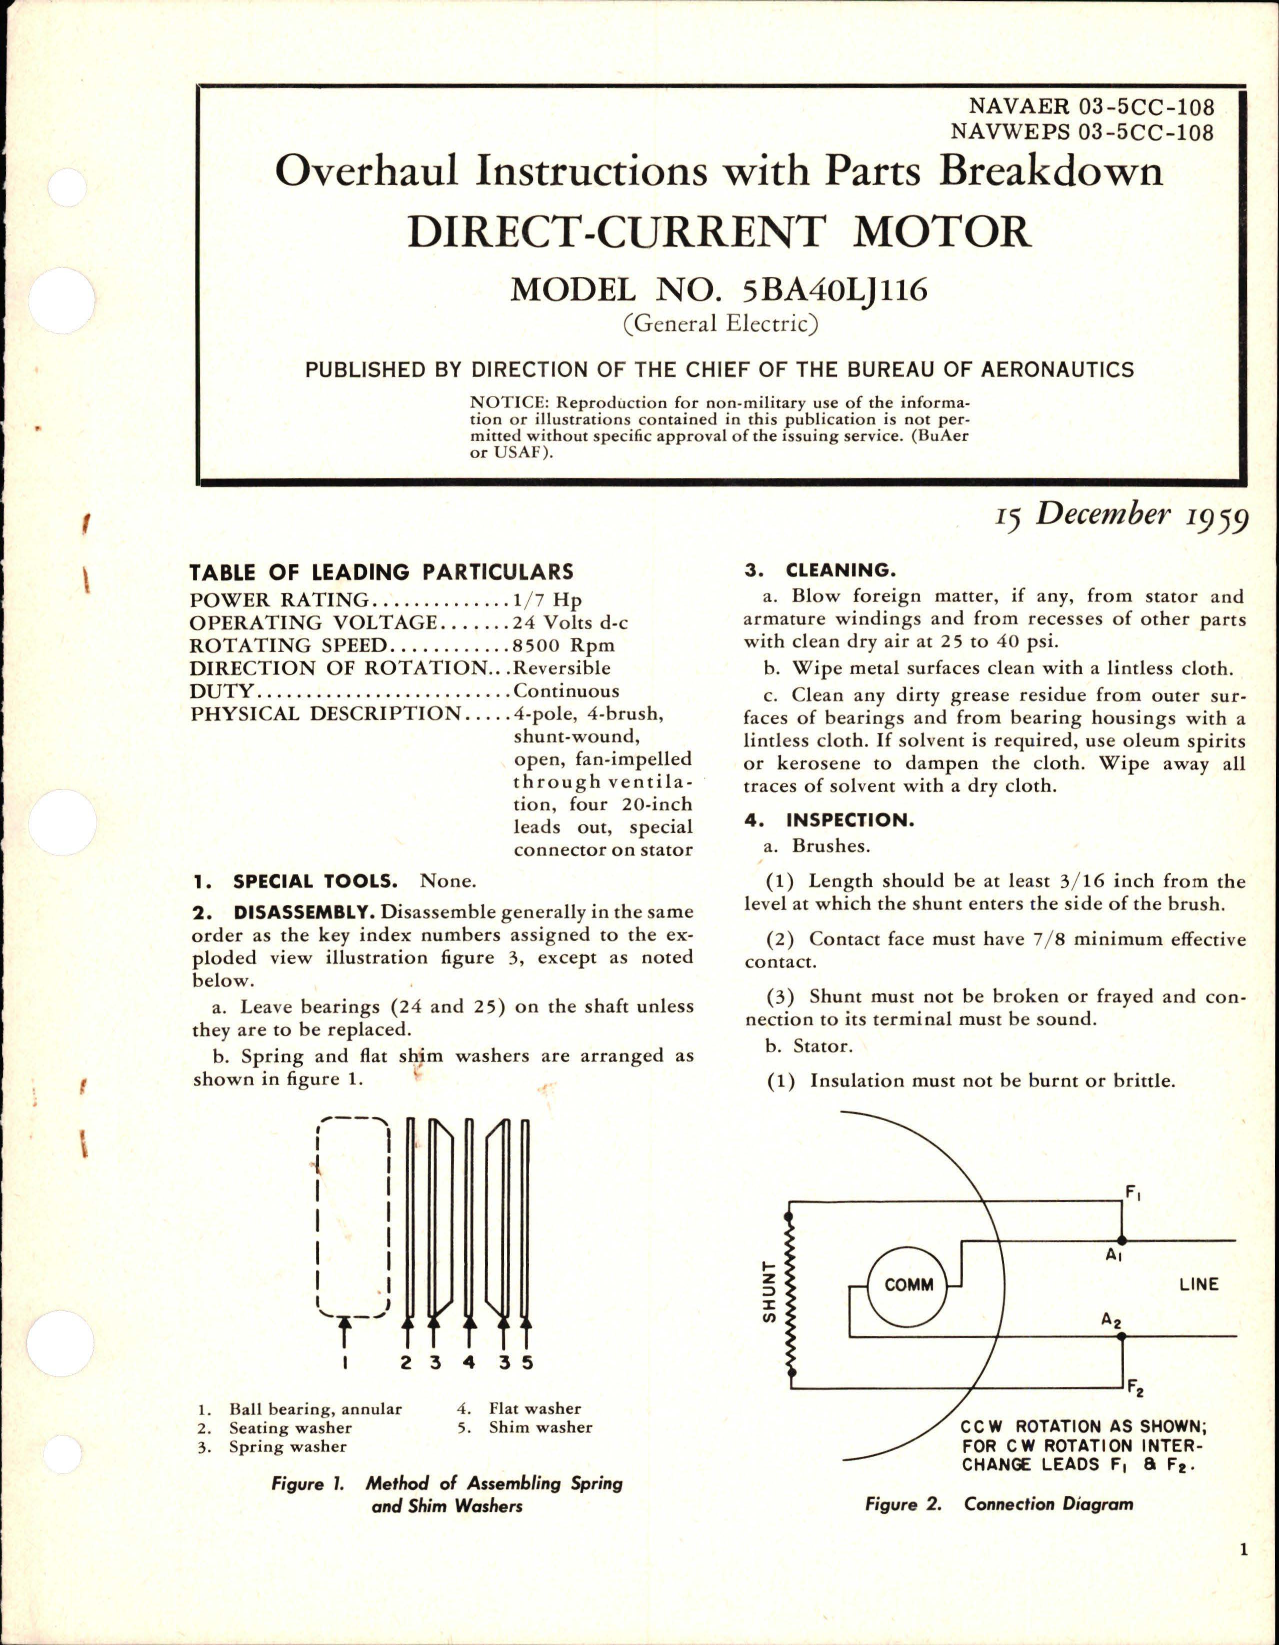 Sample page 1 from AirCorps Library document: Overhaul Instructions with Parts Breakdown for Direct Current Motor - Model 5BA40LJ116 